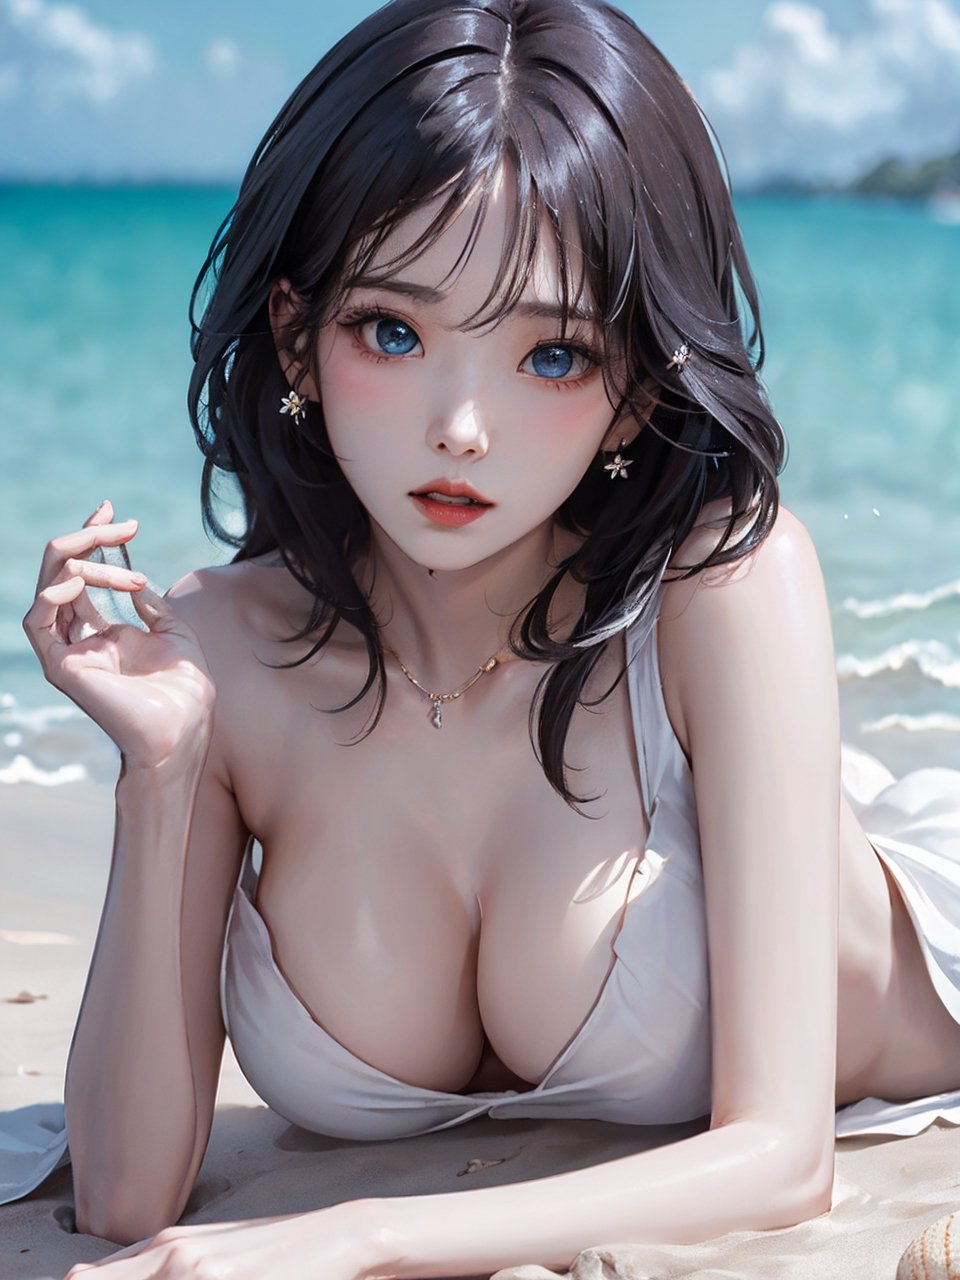 Create a digital artwork of an elegant Instagram model with striking blue eyes, luxurious long hair cascading down, and a complexion that radiates purity and grace.,iu, Lying on beach, breast exposure